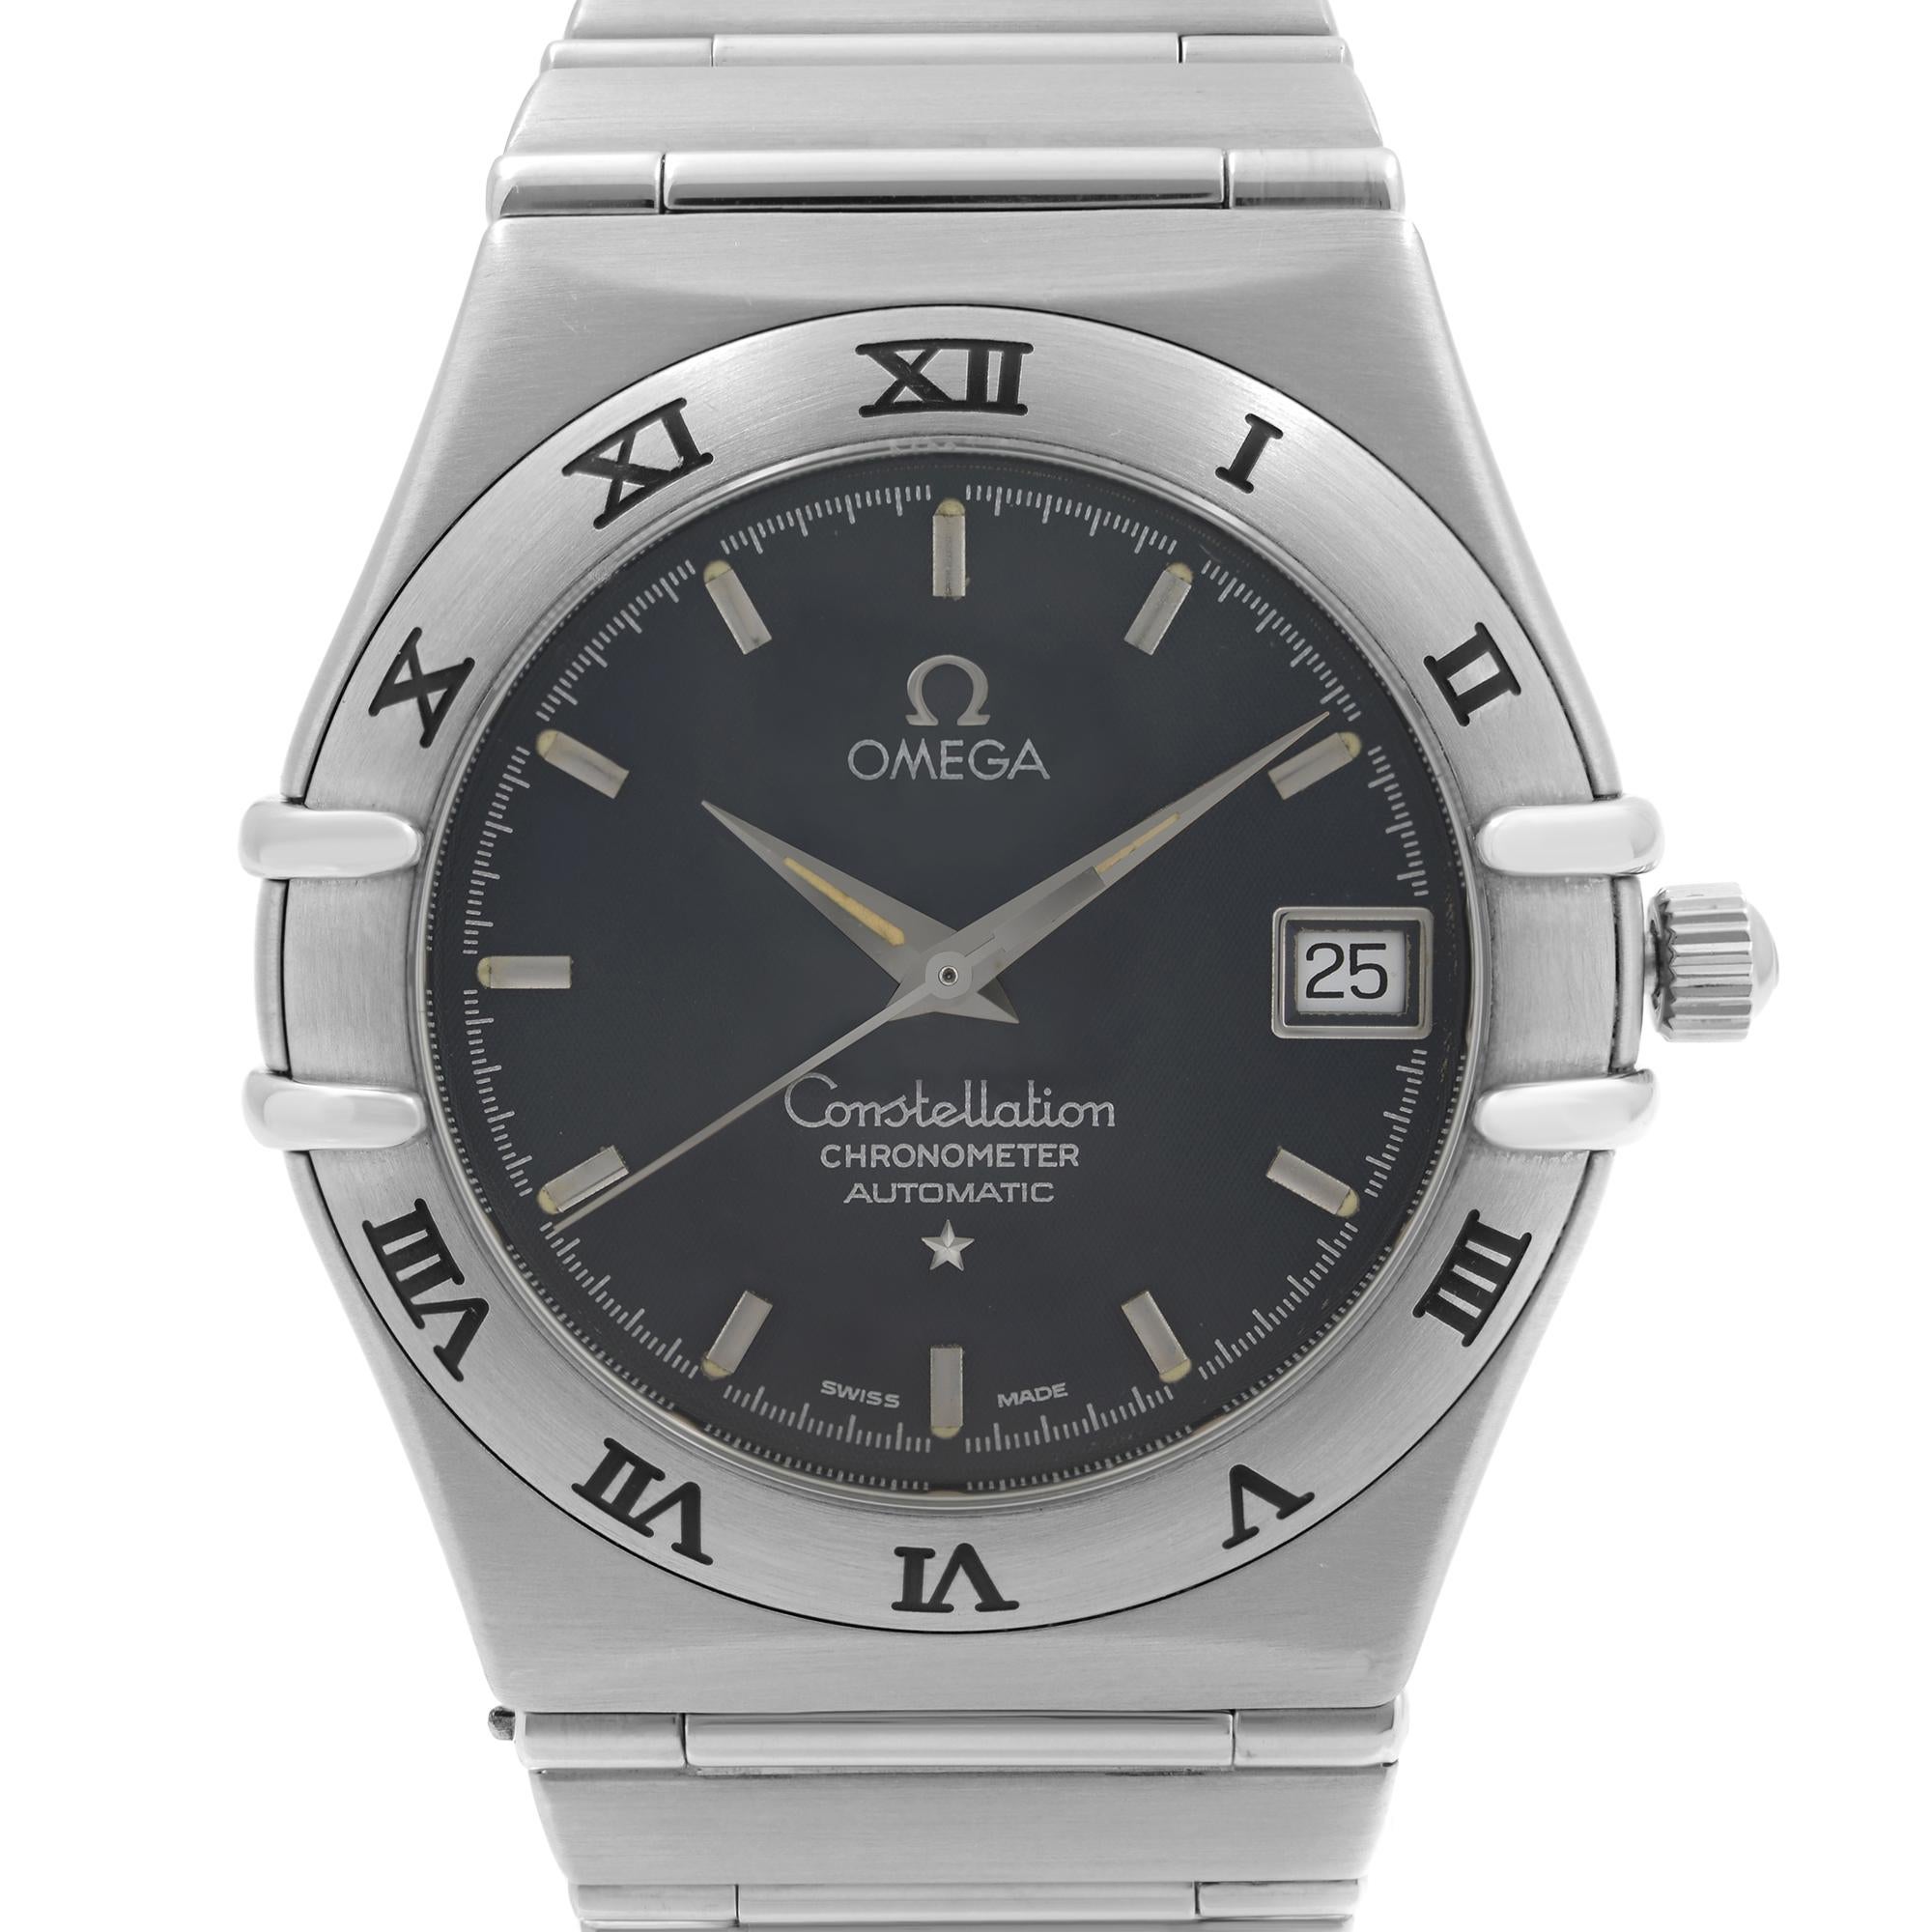 Pre-owned Omega Constellation Stainless Steel 35 mm Date Gray Dial Men's Automatic Watch 3681201. The Timepiece is powered by an Automatic movement. Features: Polished Stainless Steel Case and Steel Bracelet. Fixed Steel Bezel. Gray Dial with